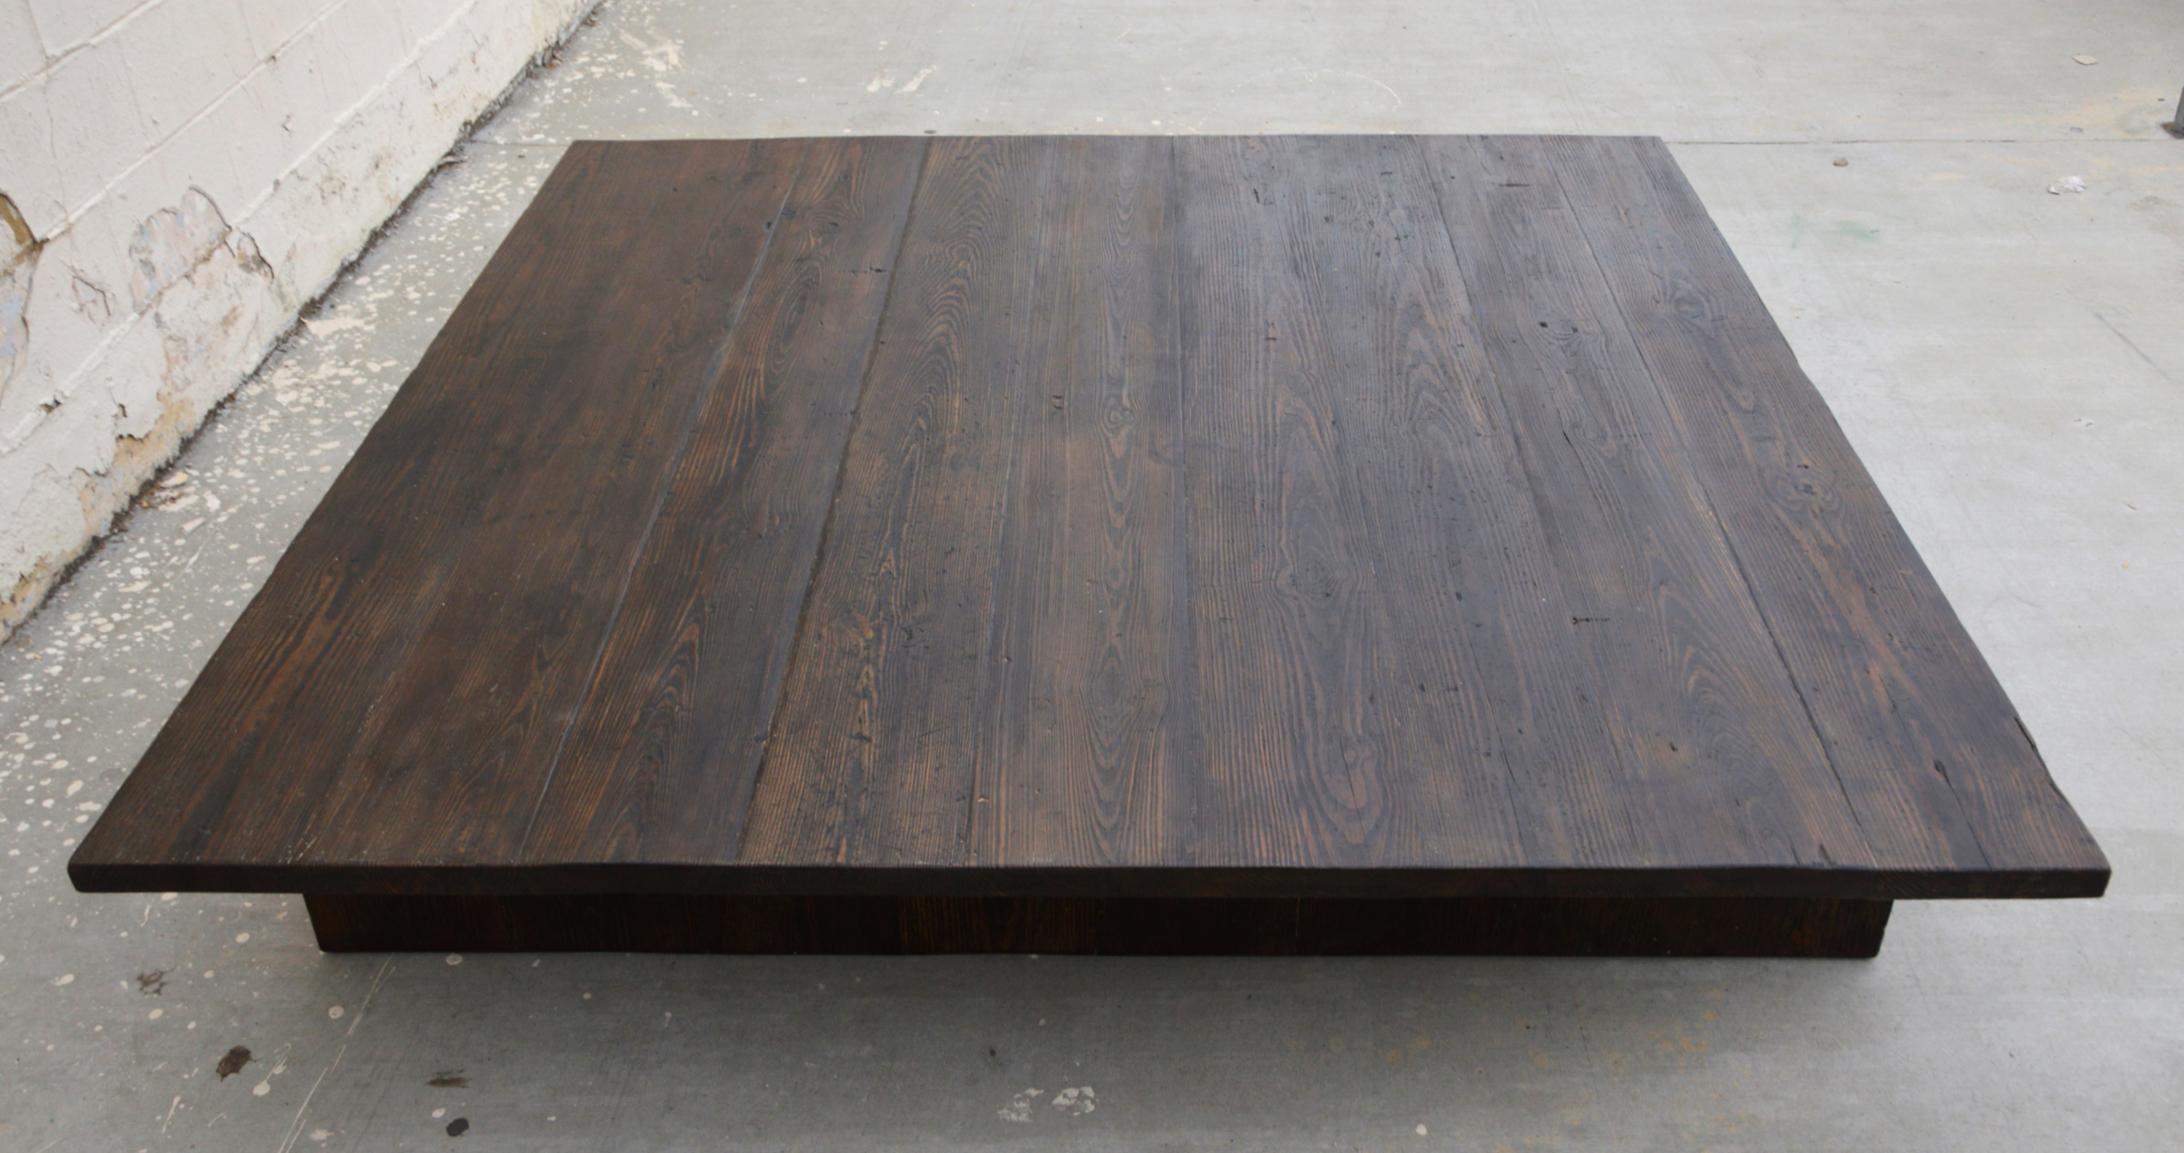 American Craftsman Coffee Table Made from Distressed Oak